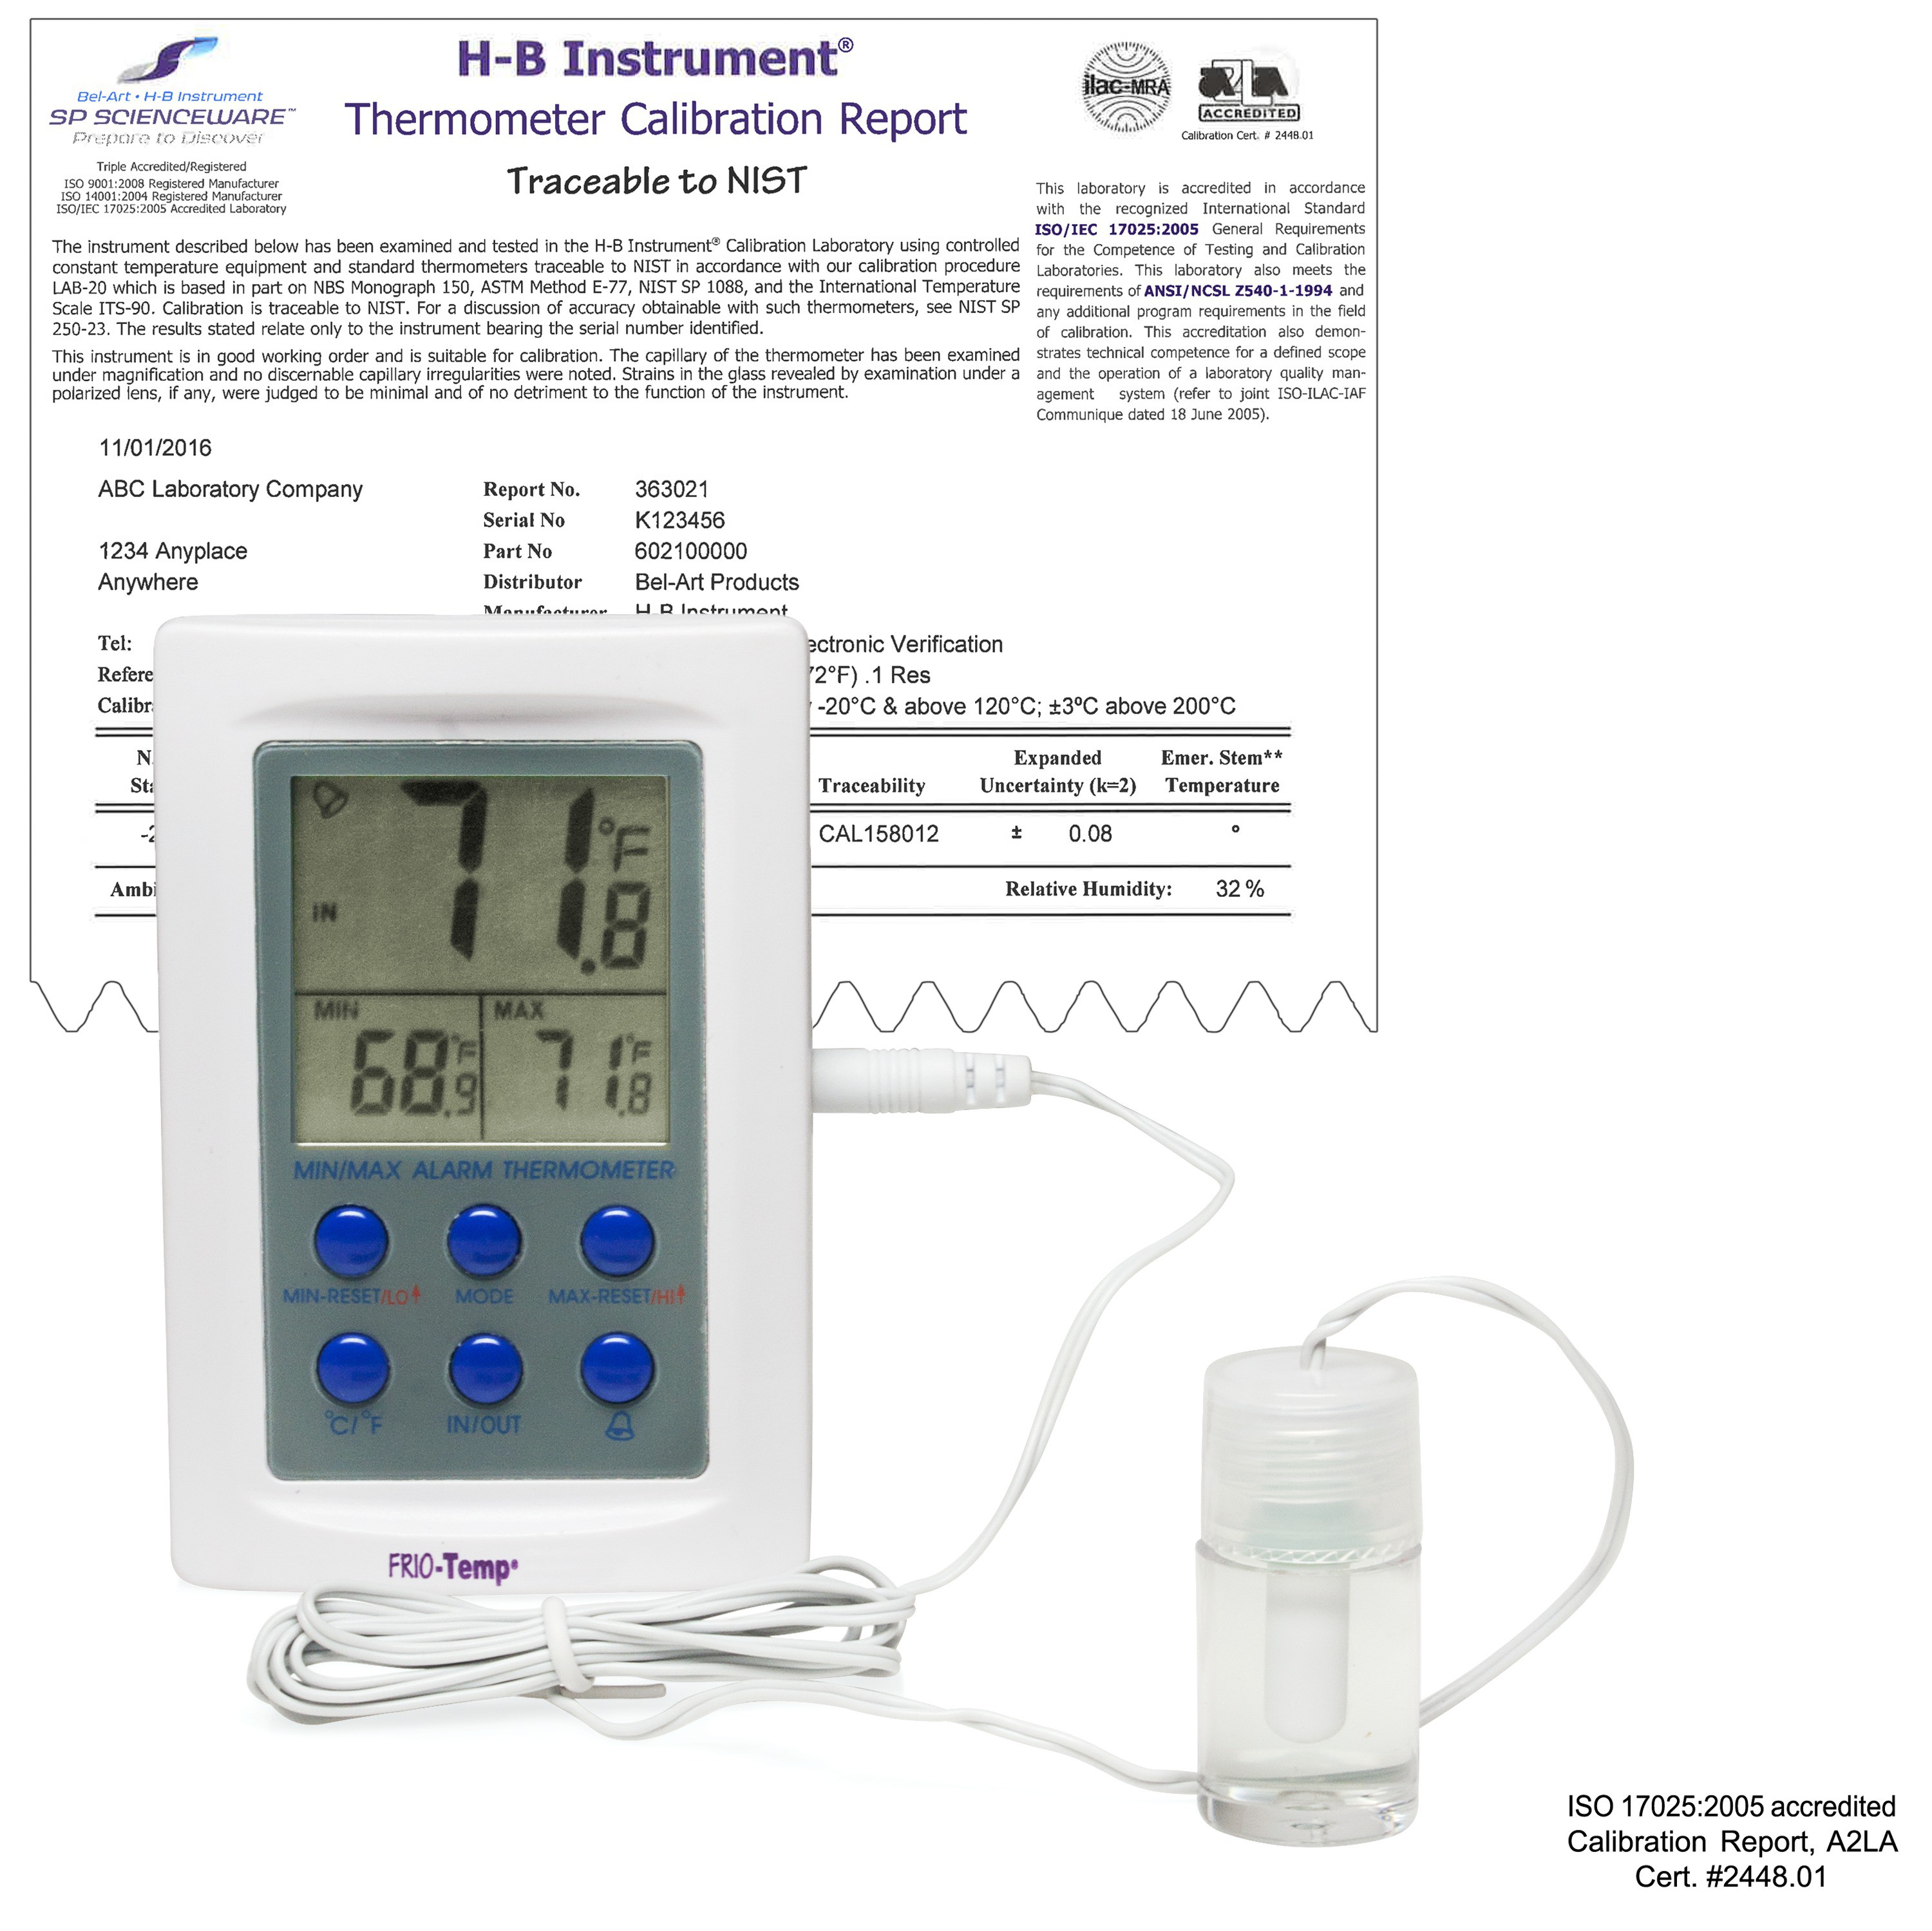 H-B Frio Temp Calibrated Dual Zone Electronic Verification Thermometer; -50/70C (-58/158F) External, 0/50C (32/122F) Internal, 22C Ambient Calibration